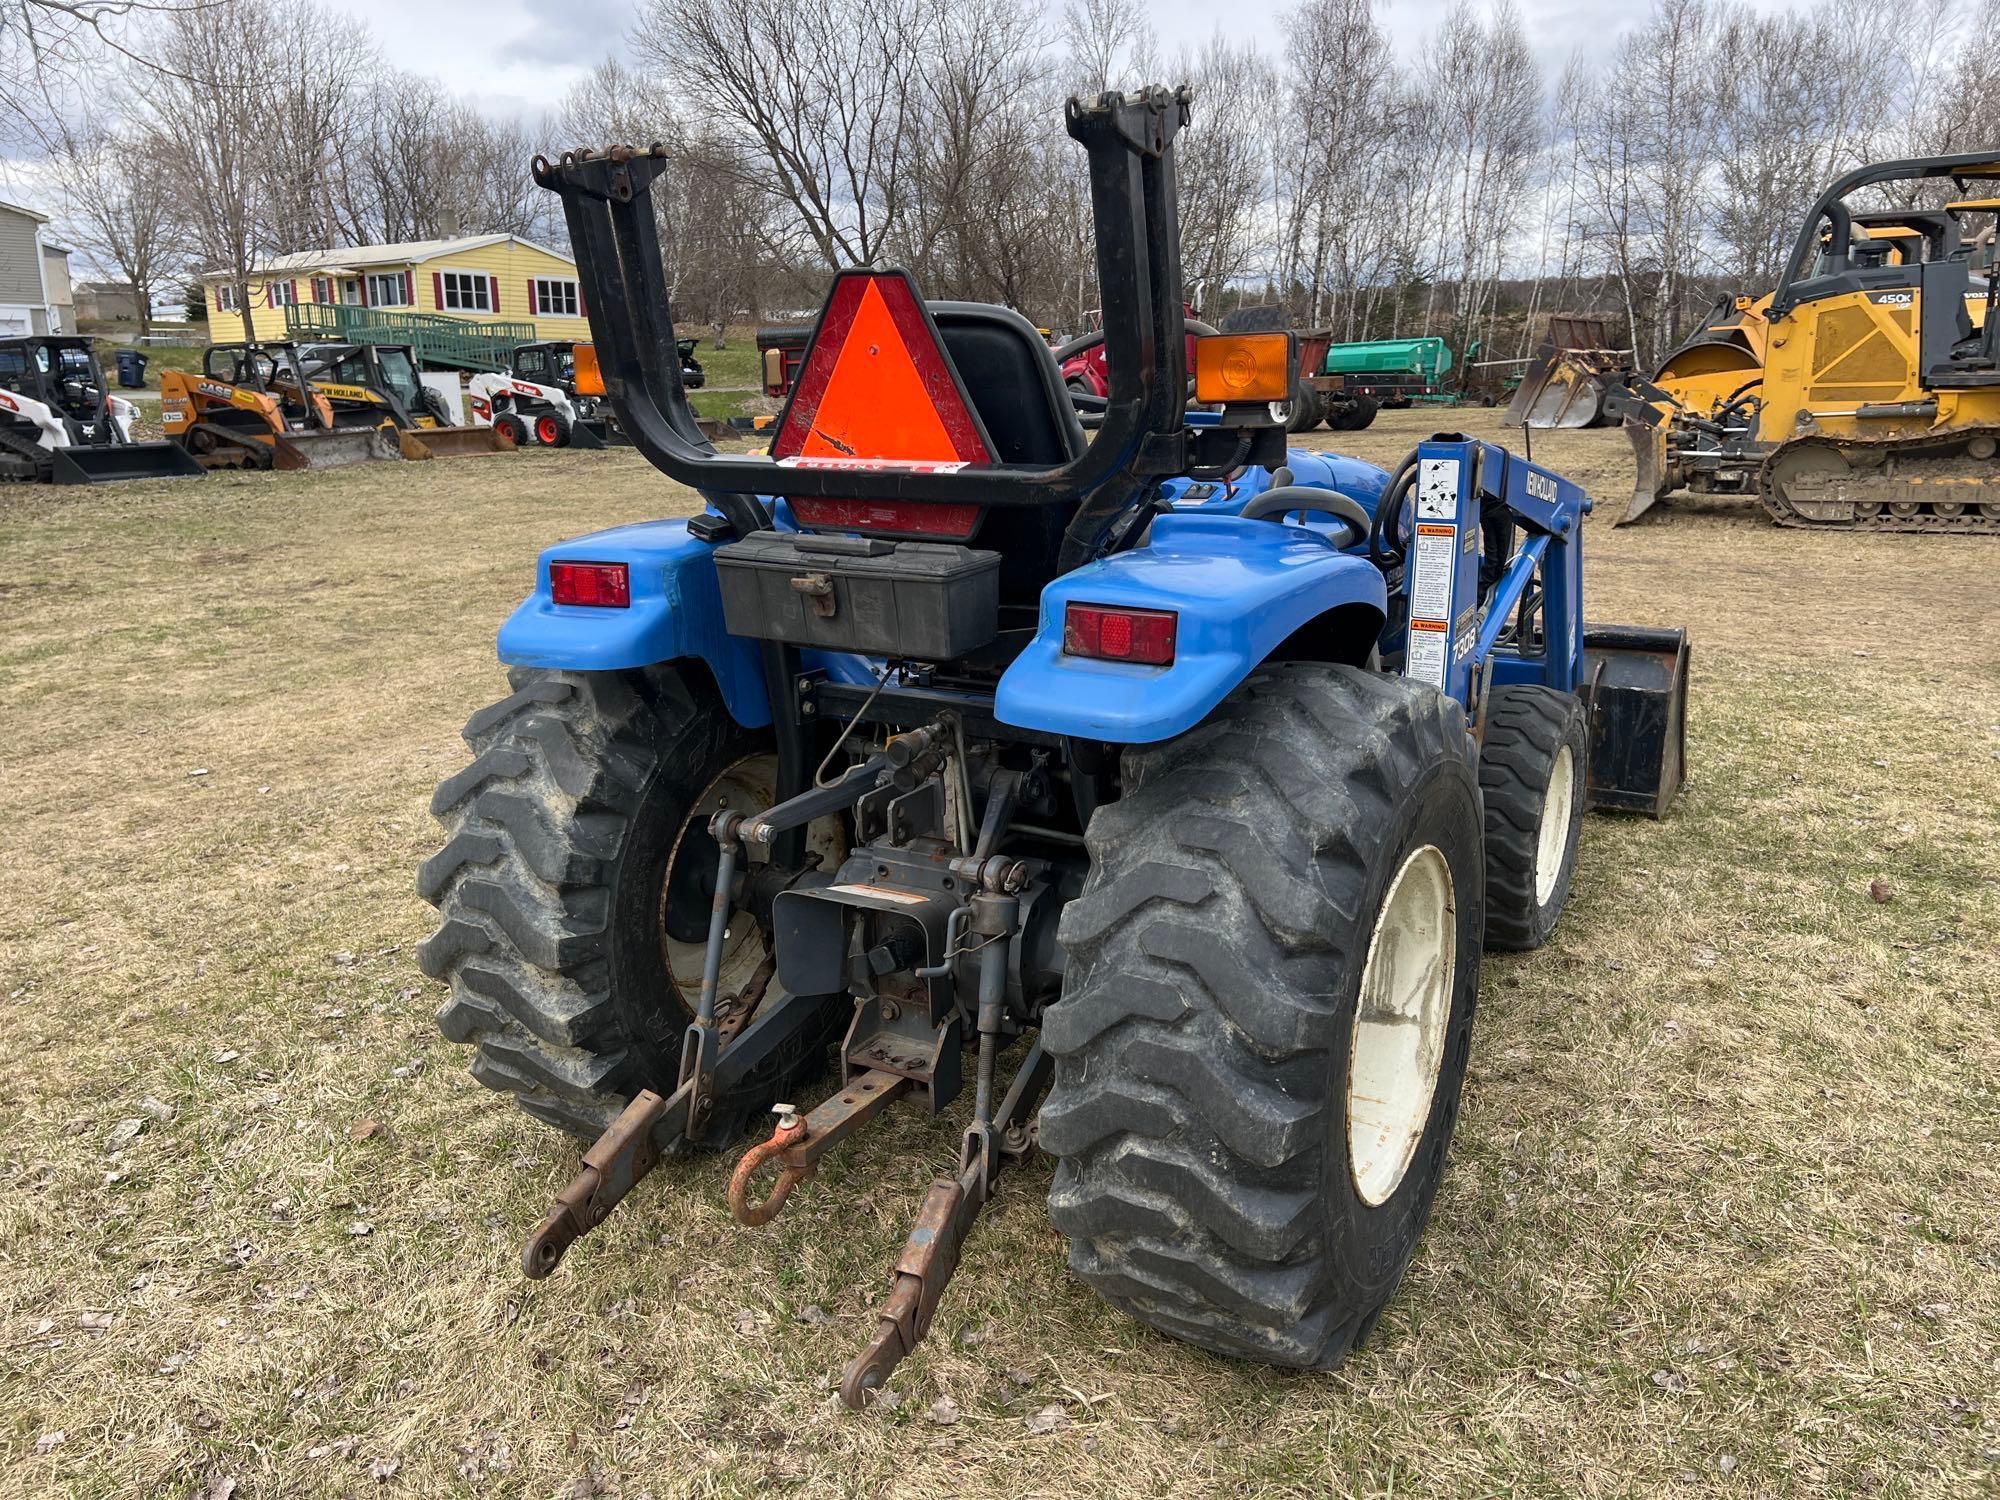 NEW HOLLAND TC33D TRACTOR LOADER 4x4 SN:6558, powered by diesel engine, equipped with ROPS, GP front